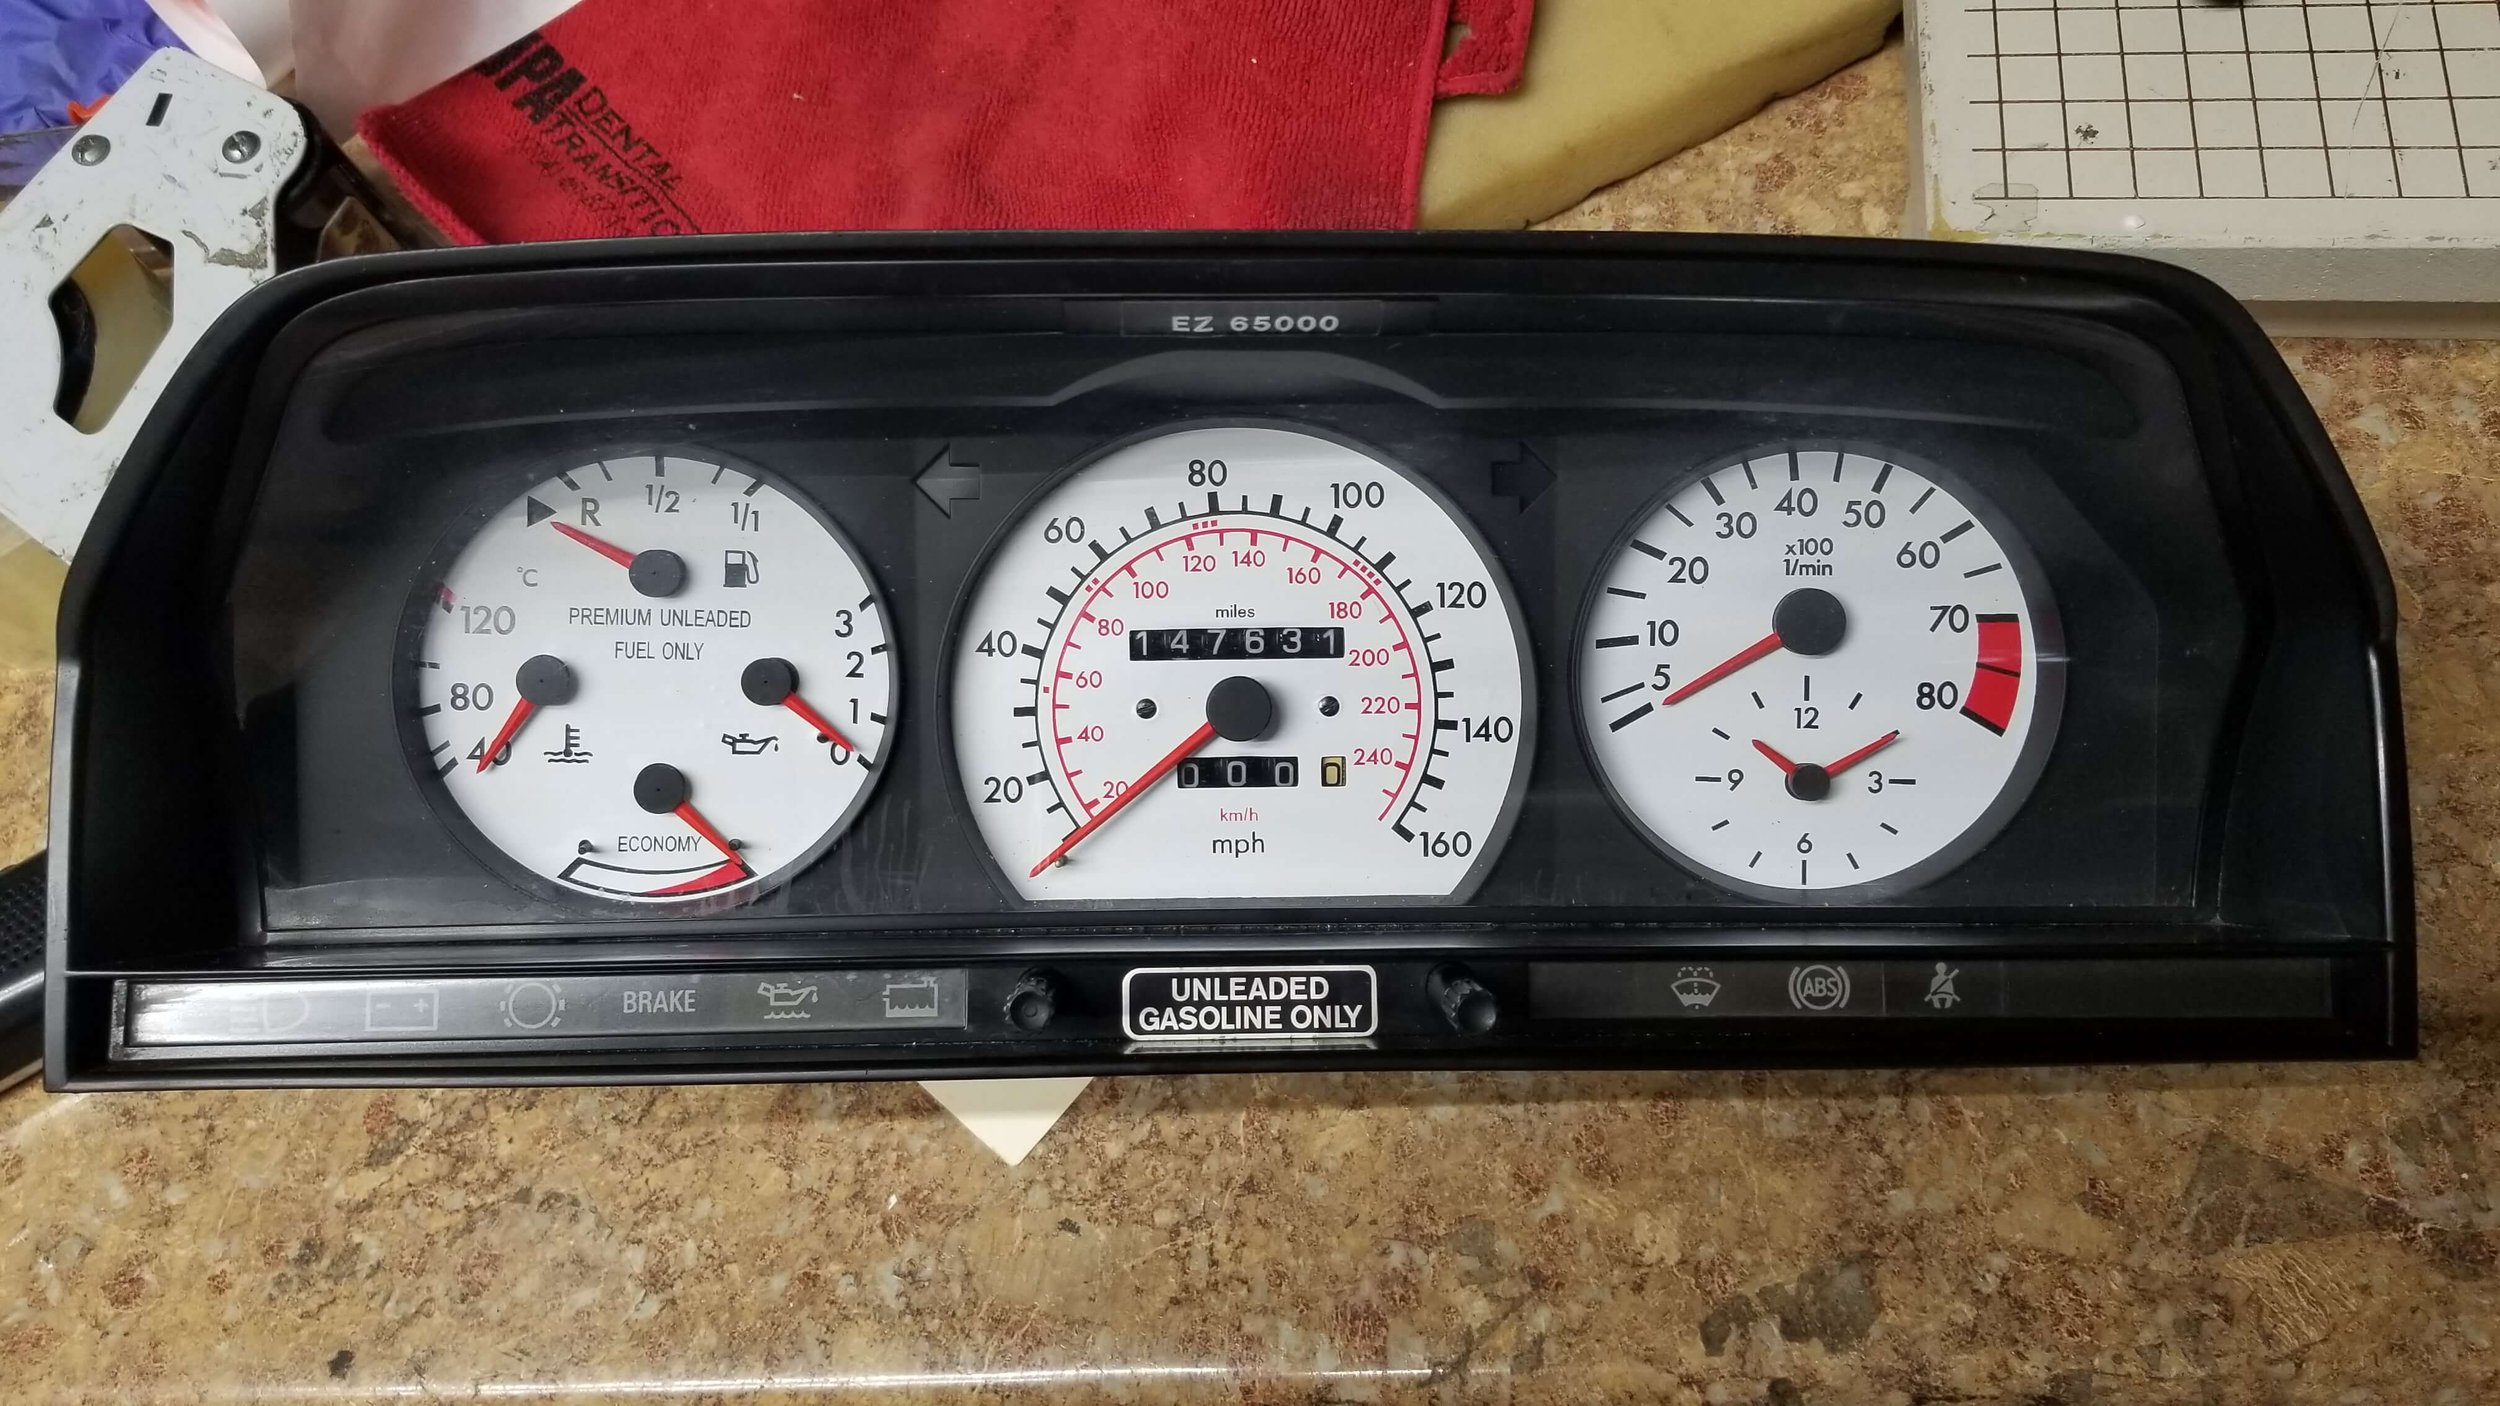 Changed Dial Faces, repaired odometer, painted needles